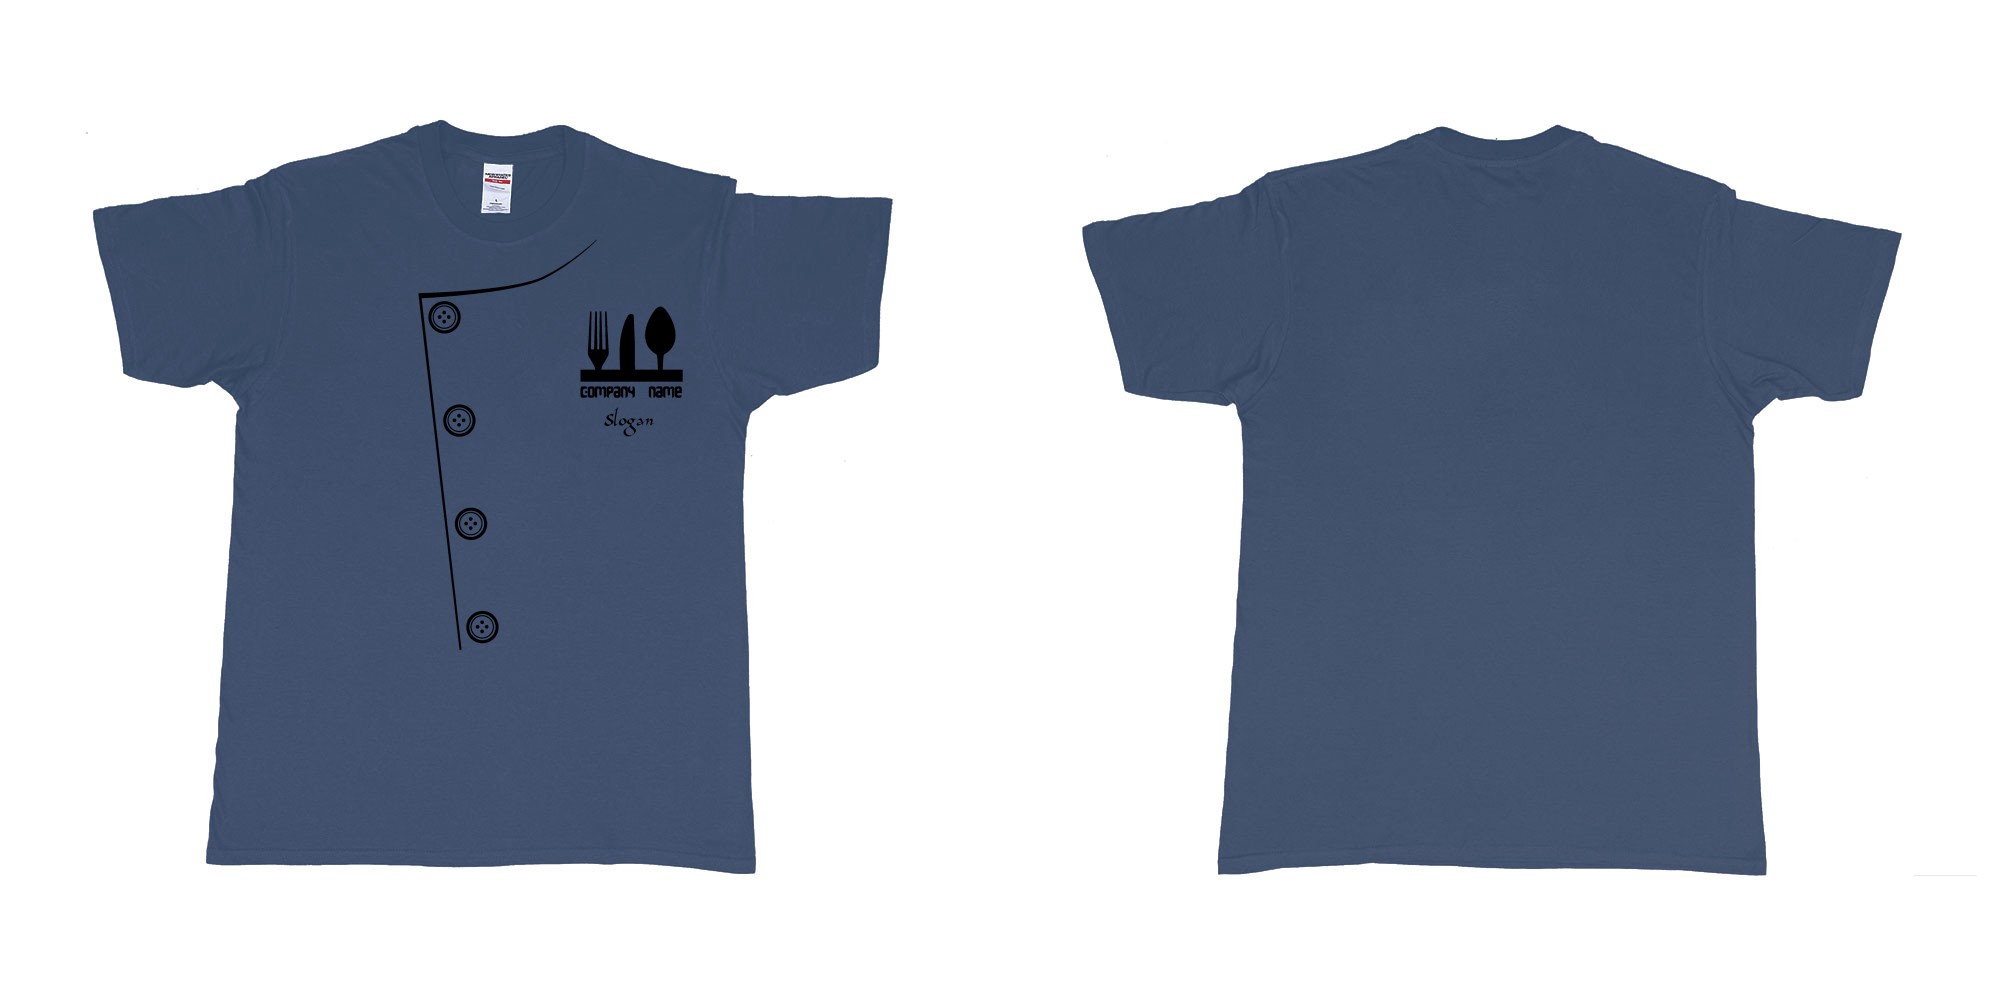 Custom tshirt design chef uniform with fork knife and spoon in fabric color navy choice your own text made in Bali by The Pirate Way